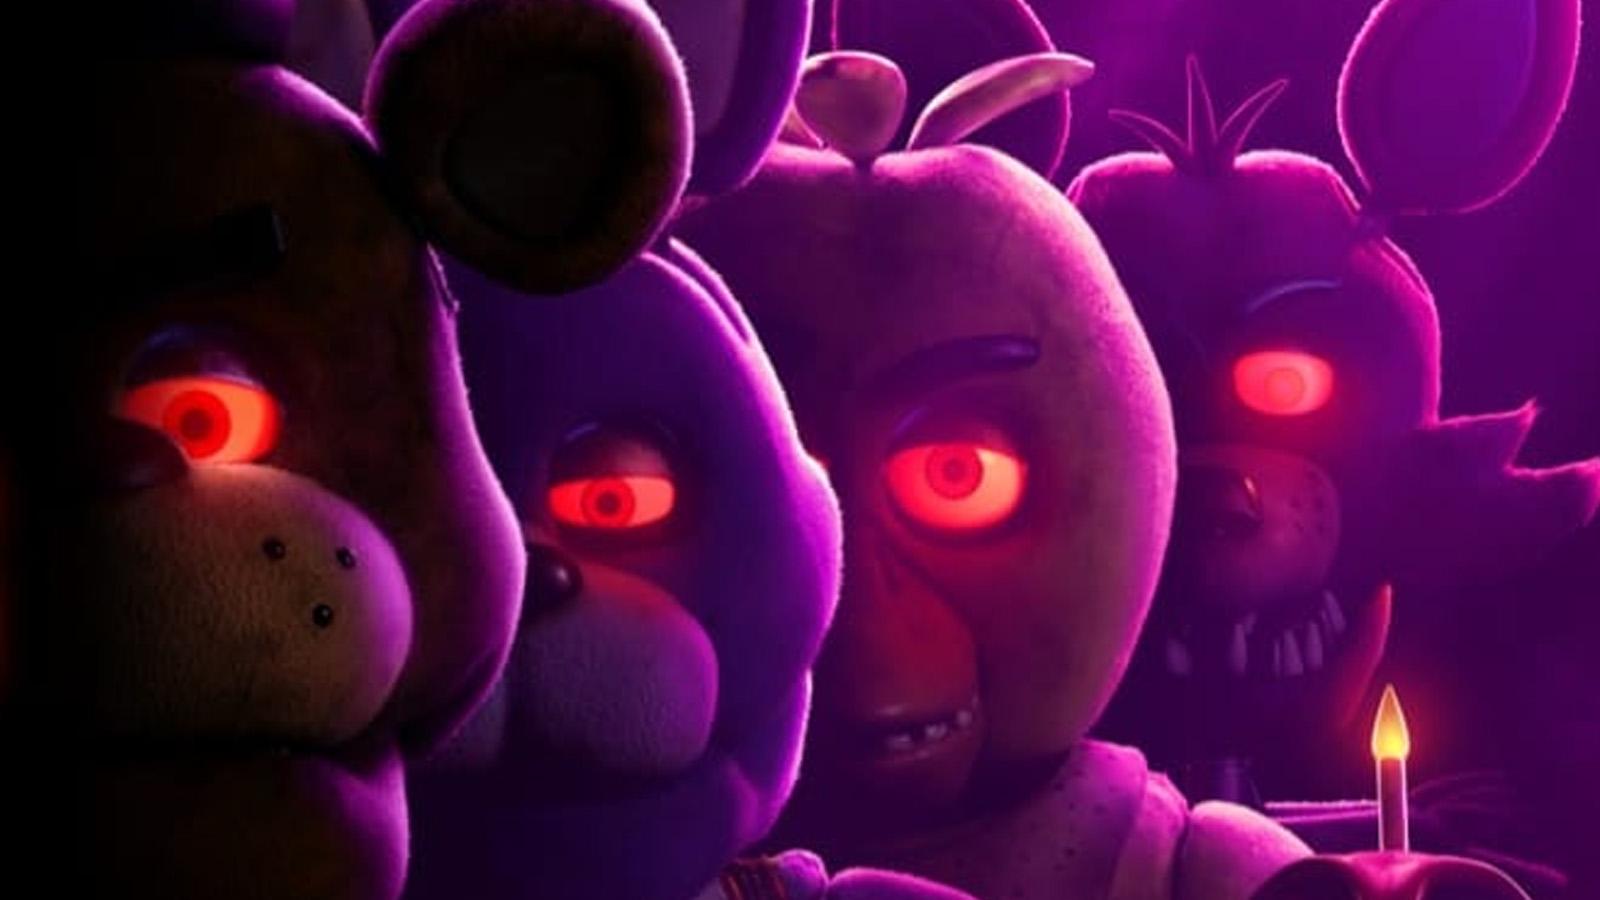 Five Nights at Freddy’s movie expected to have 3-hour runtime